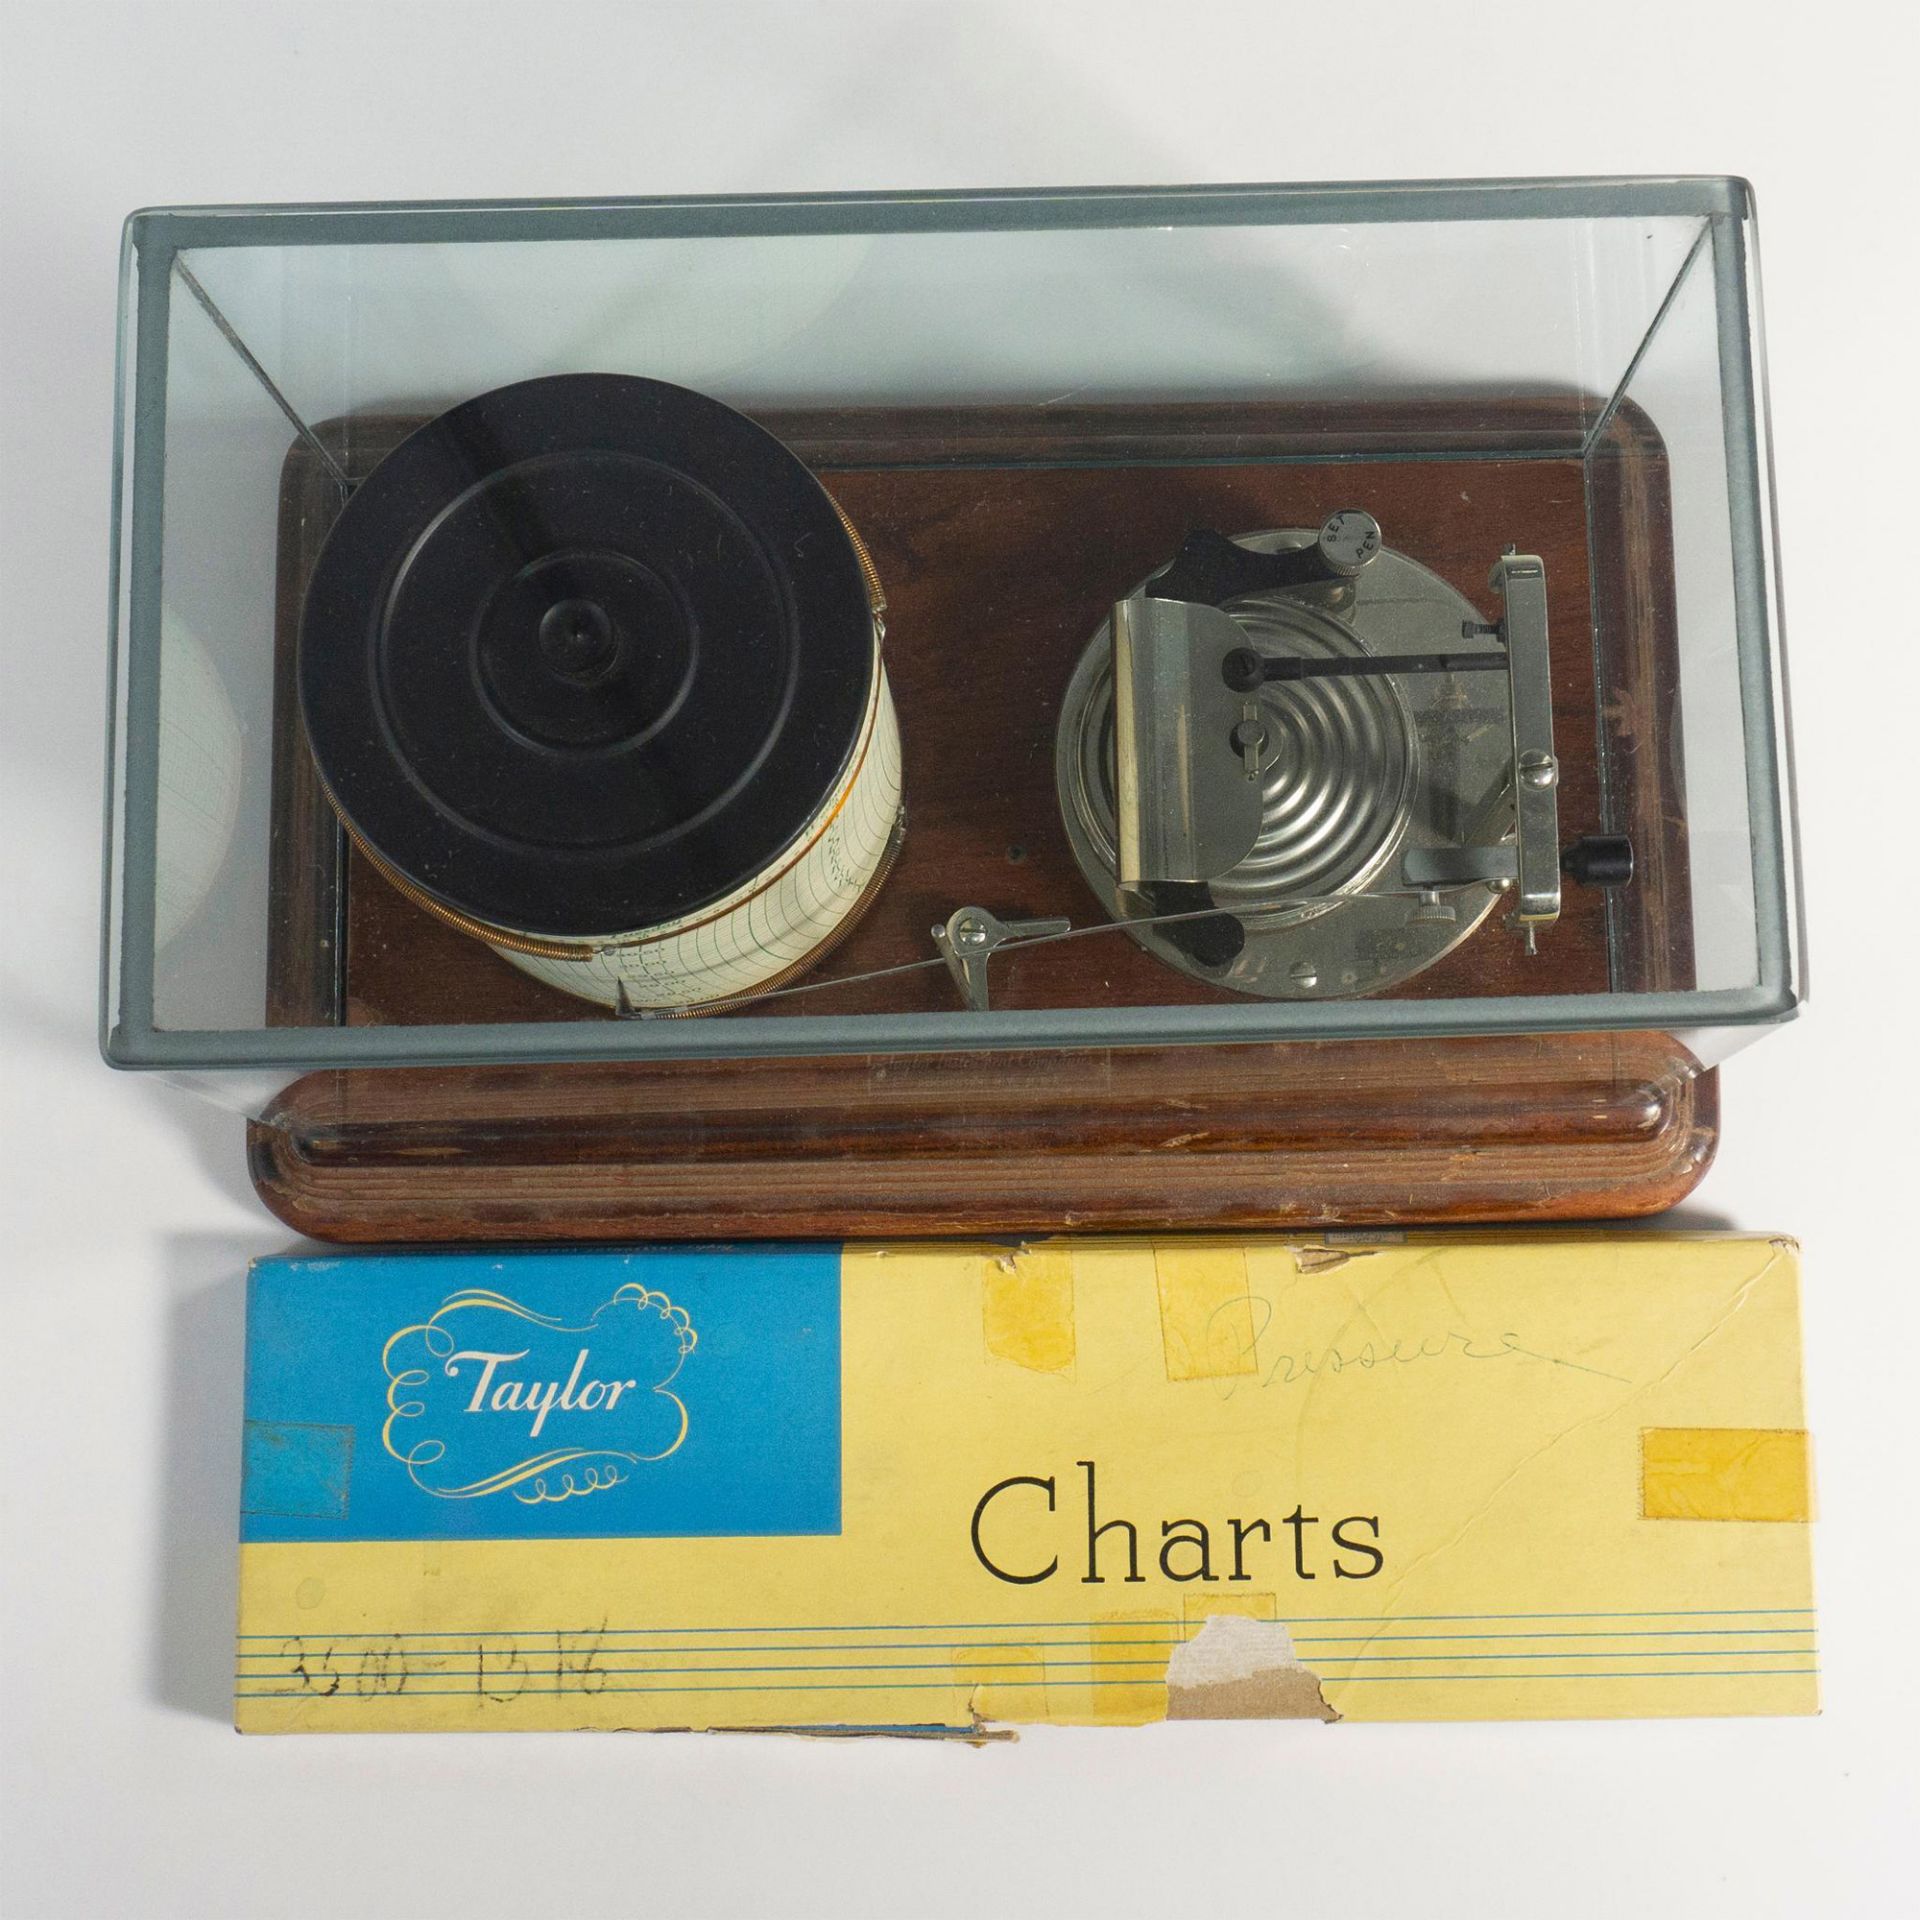 Antique Taylor Cyclo-Stormograph with Box of Charts - Image 5 of 6